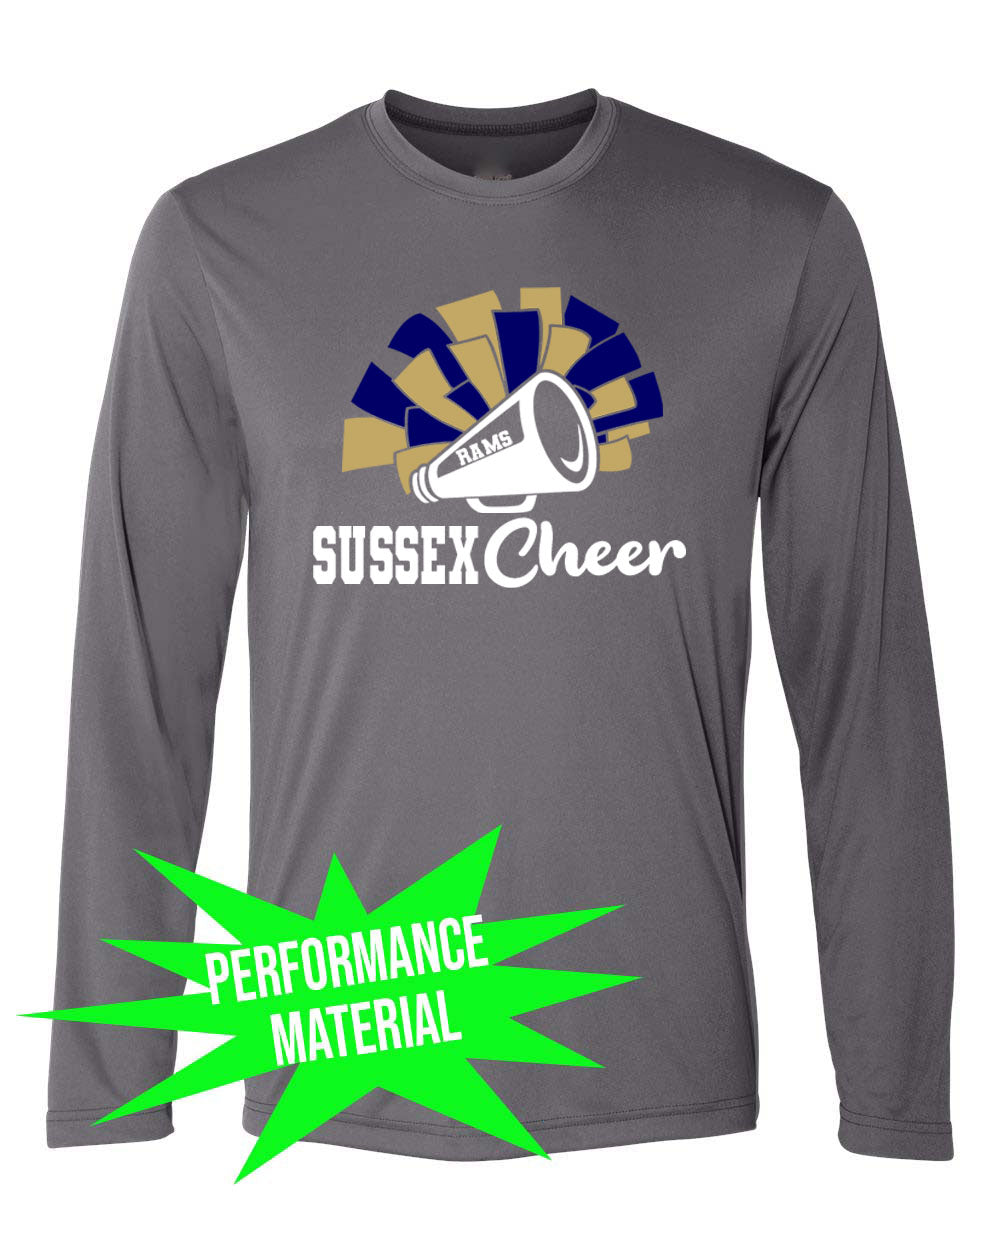 Sussex Middle Cheer Performance Material Design 2 Long Sleeve Shirt